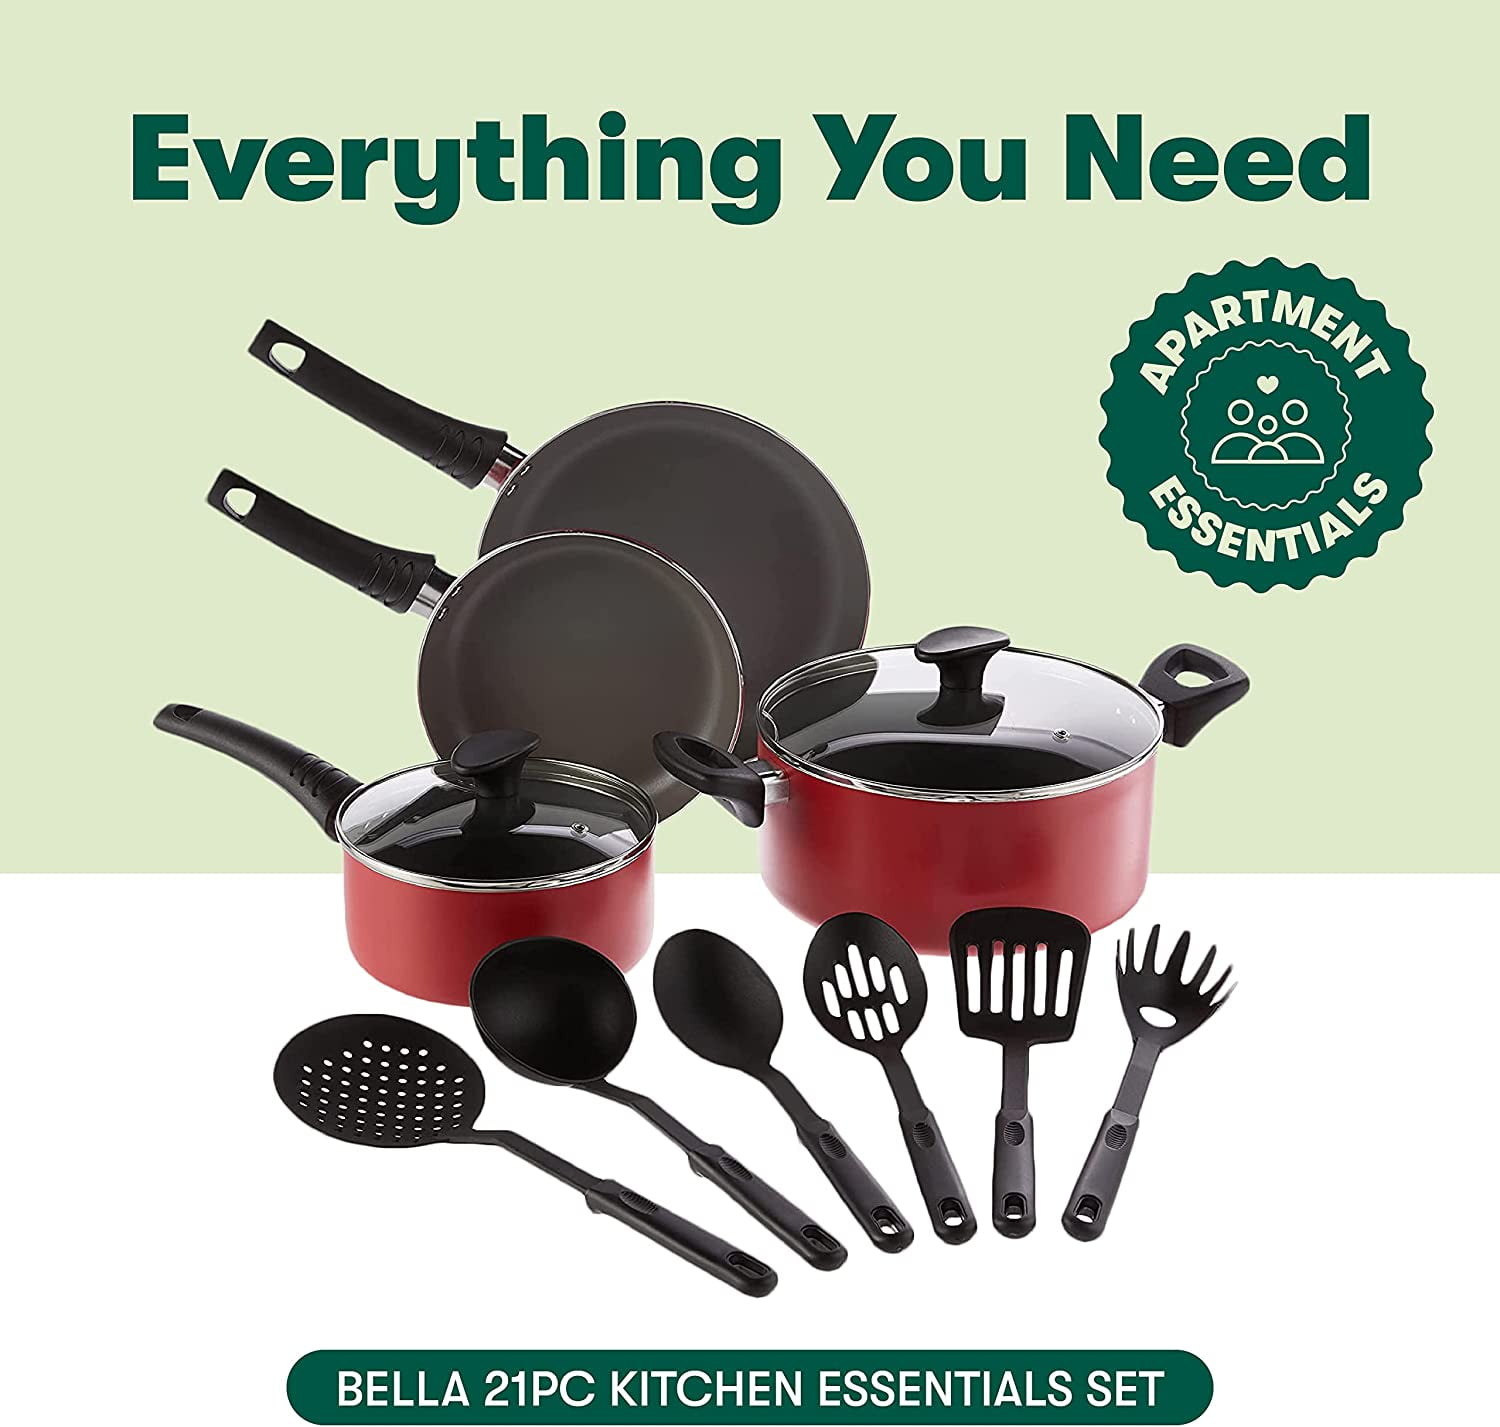  BELLA Nonstick Cookware Set with Glass Lids - Aluminum  Bakeware, Pots and Pans, Storage Bowls & Utensils, Compatible with All  Stovetops, 21 Piece, Red: Home & Kitchen